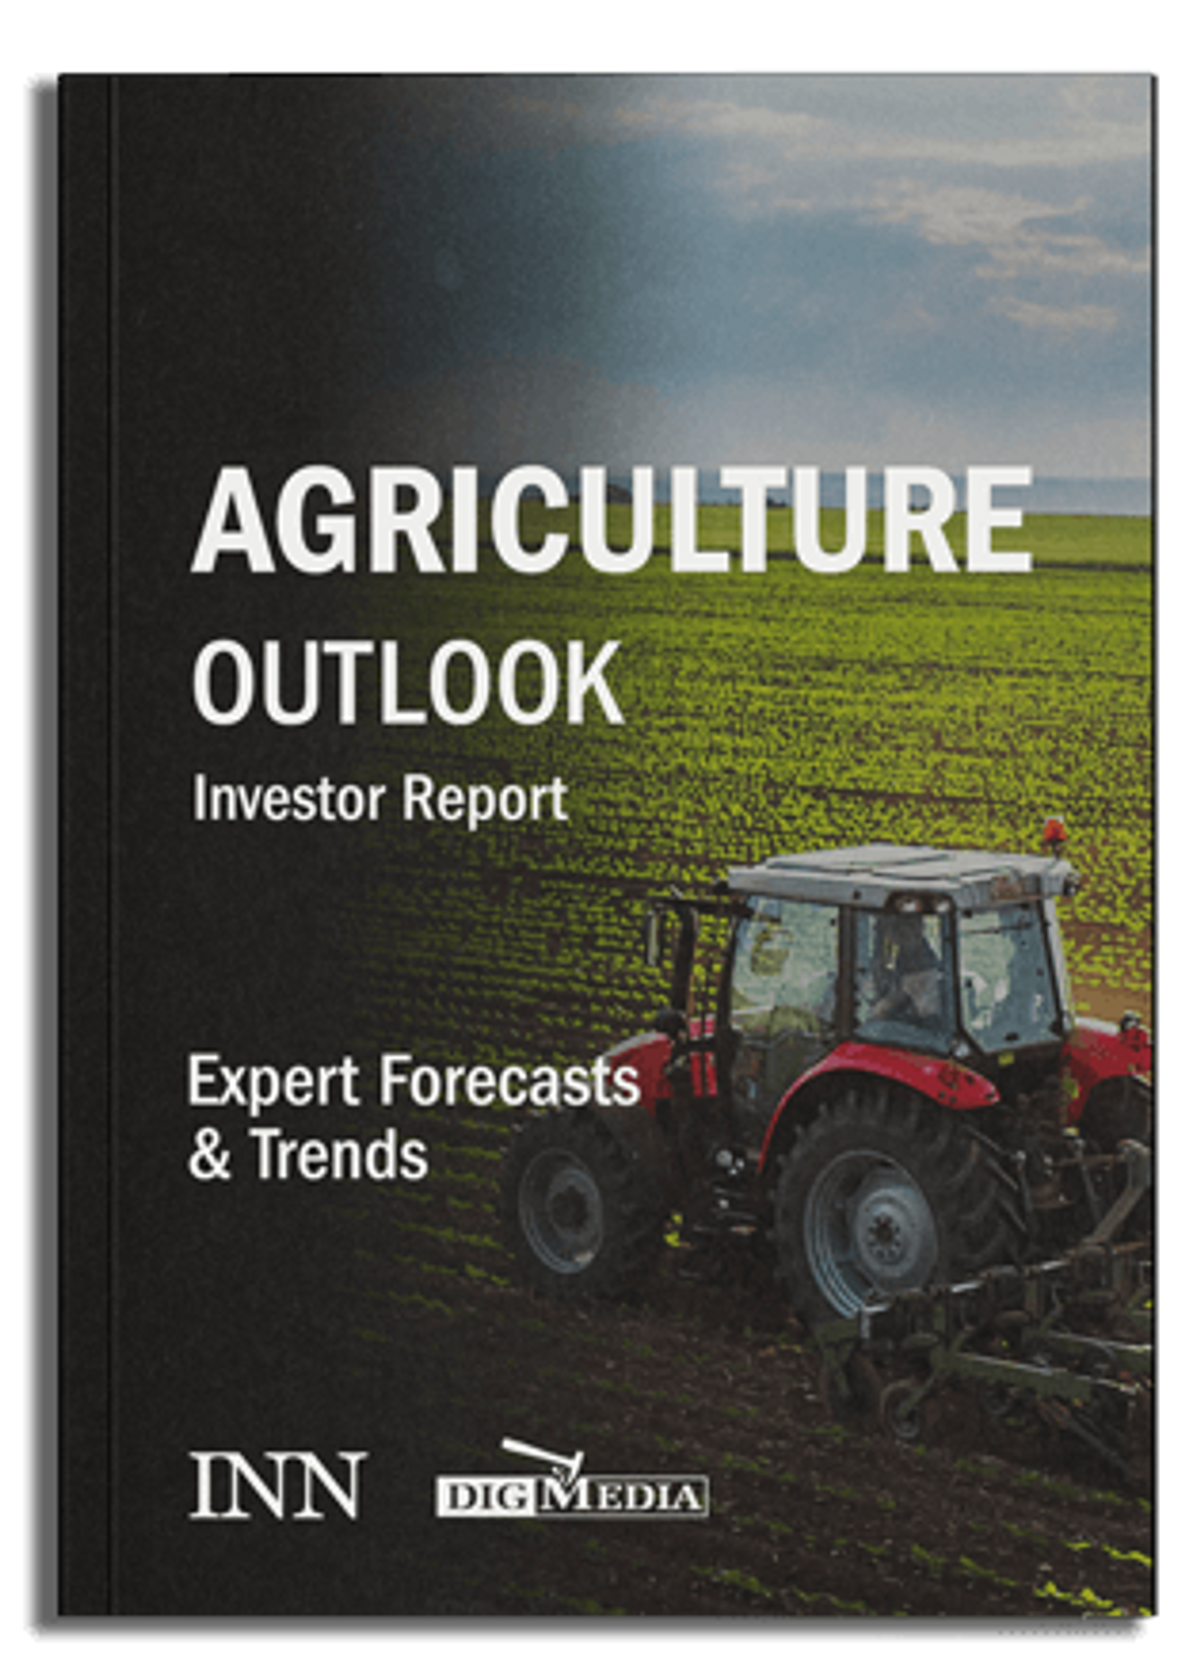 Agriculture Market Outlook Report